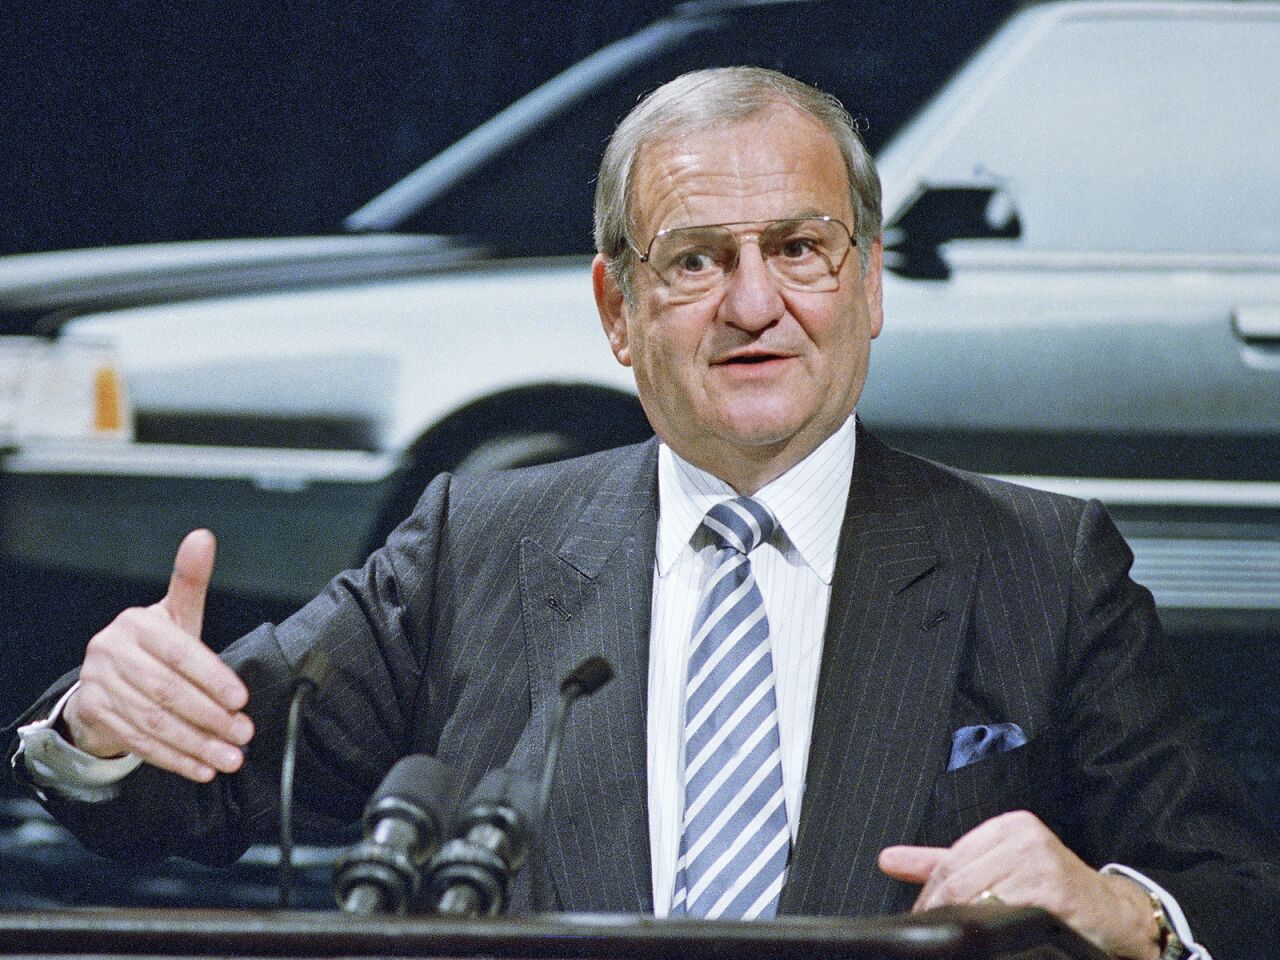 Lee A. Iacocca's swaggering persona dominated the automobile industry like nobody since Henry Ford. The salesman extraordinaire had a spectacular career, punctuated by his role as father of the wildly popular Ford Mustang in 1964, his epic 1978 firing at the hands of Henry Ford II and his dramatic rescue of Chrysler in the early 1980s. He was 94.